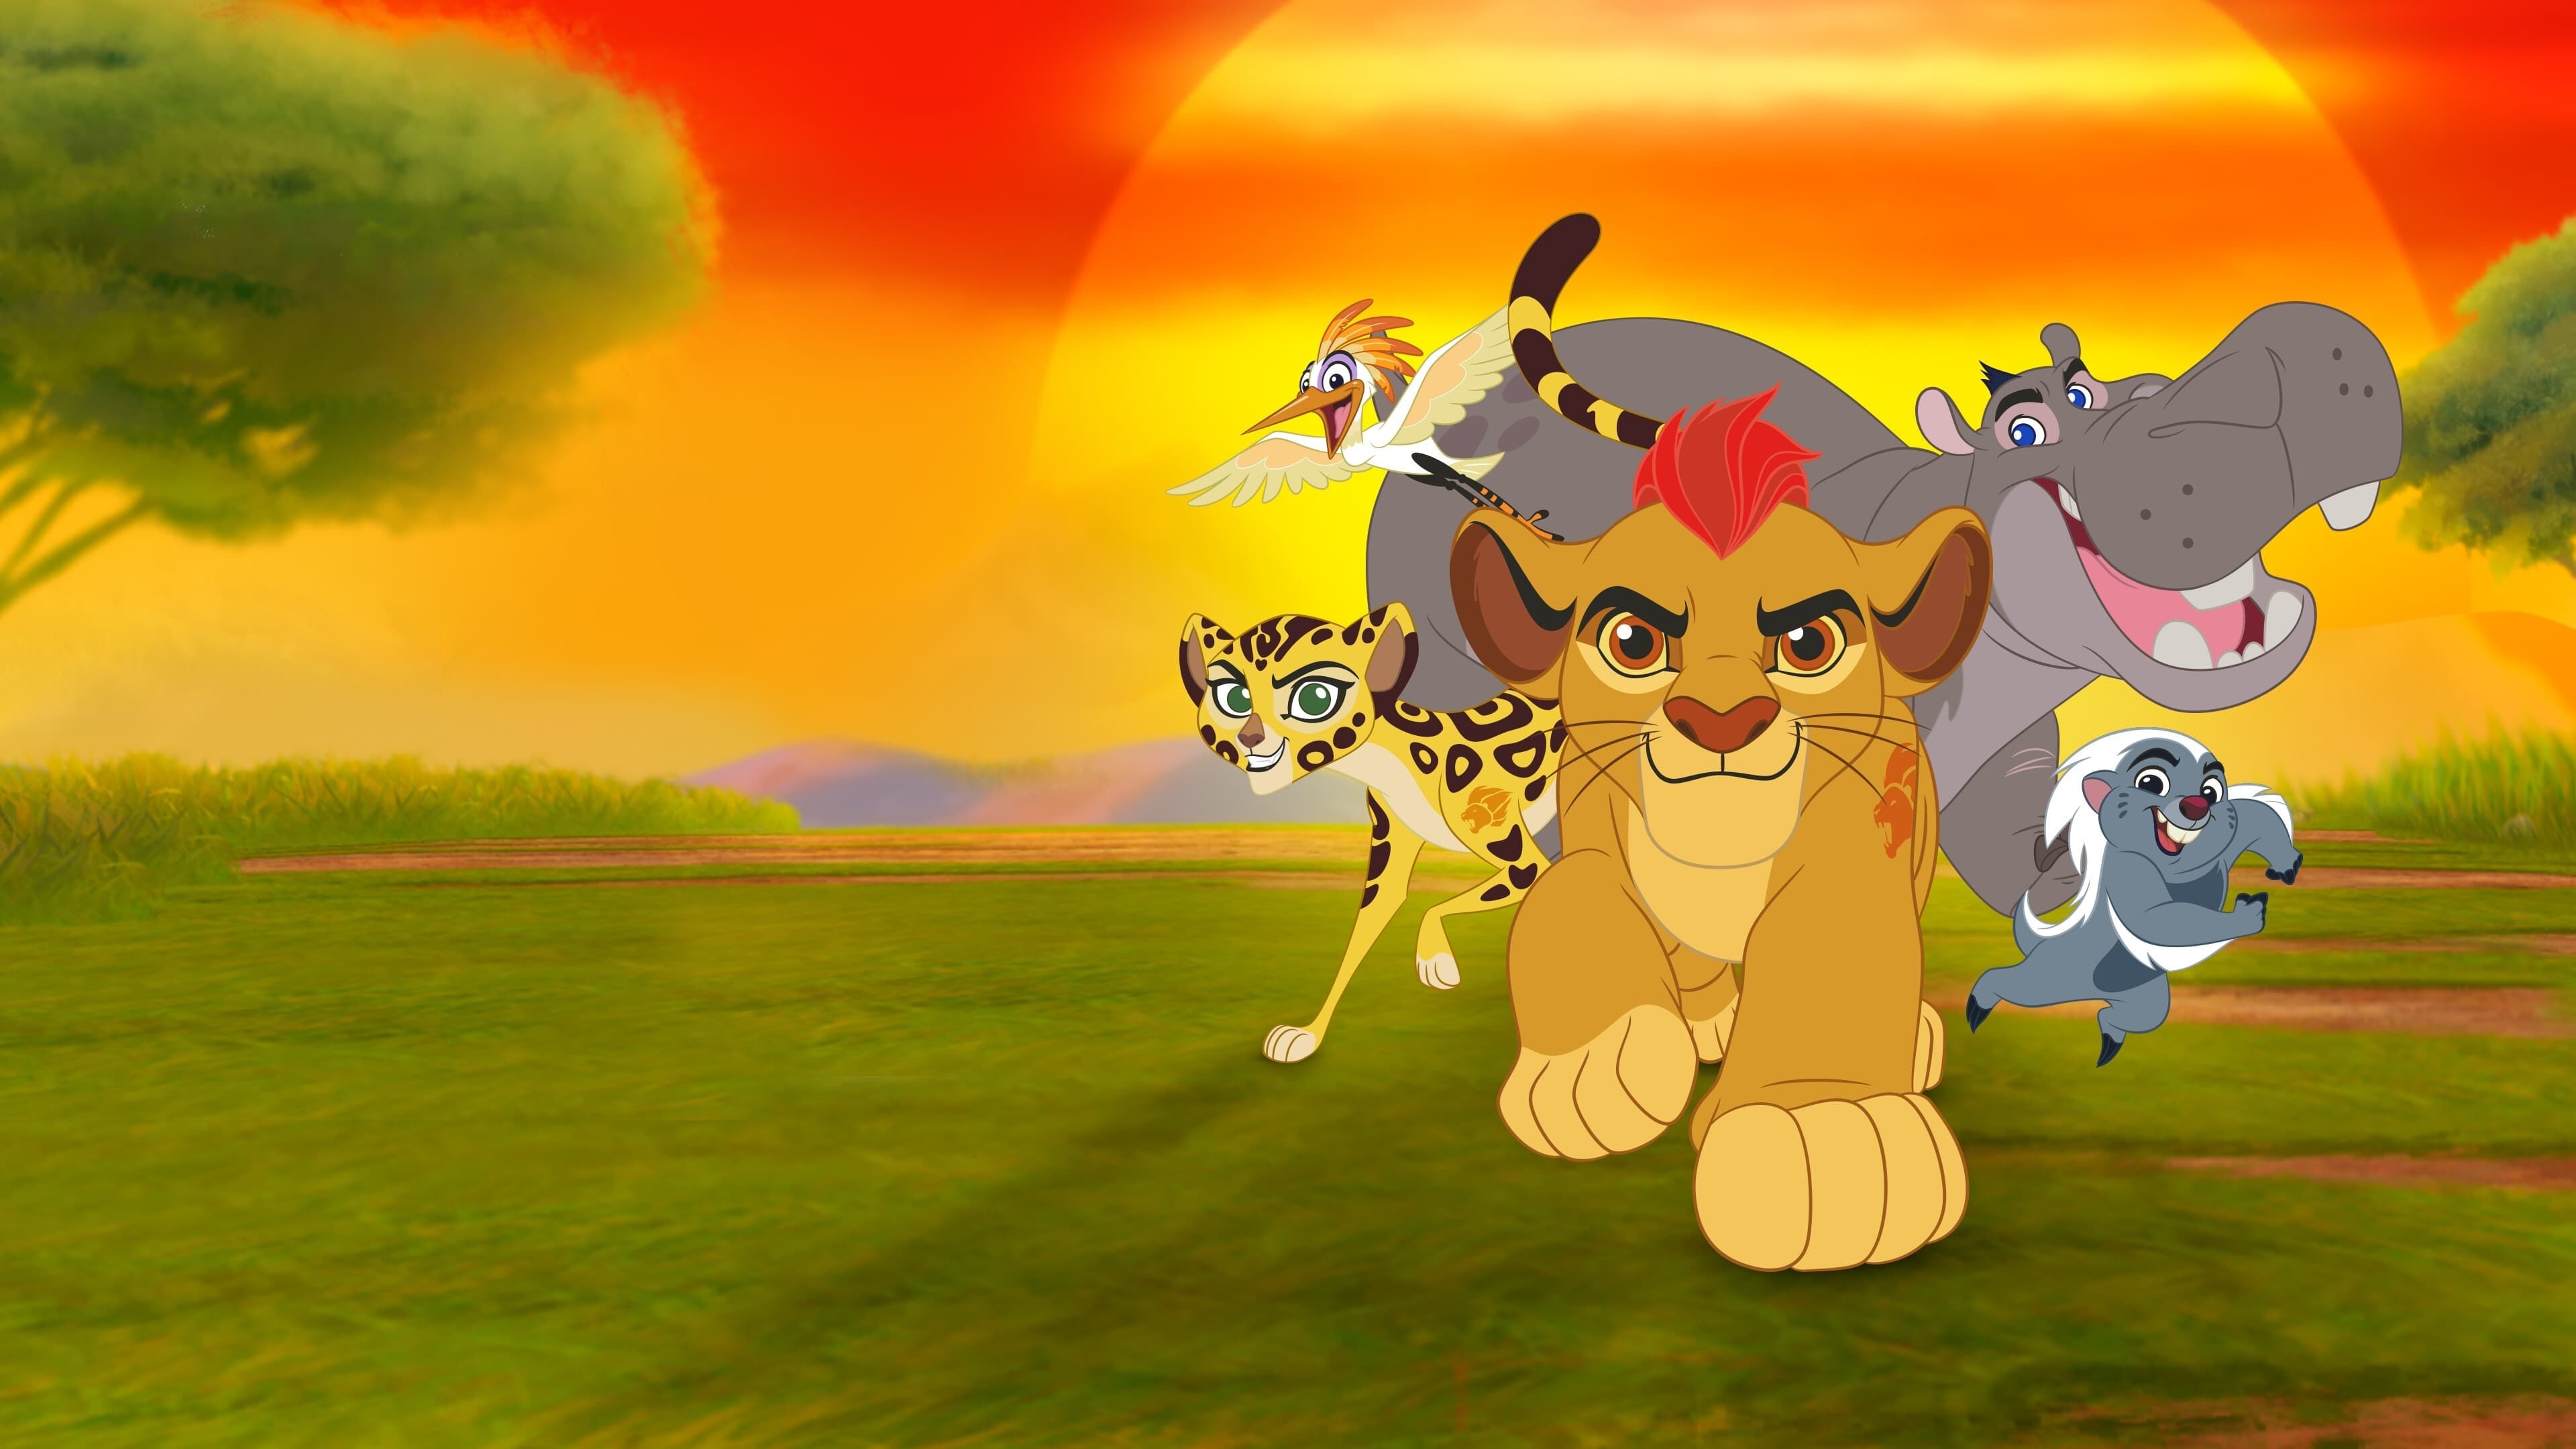 Poster Phim The Lion Guard: Return of the Roar (The Lion Guard: Return of the Roar)